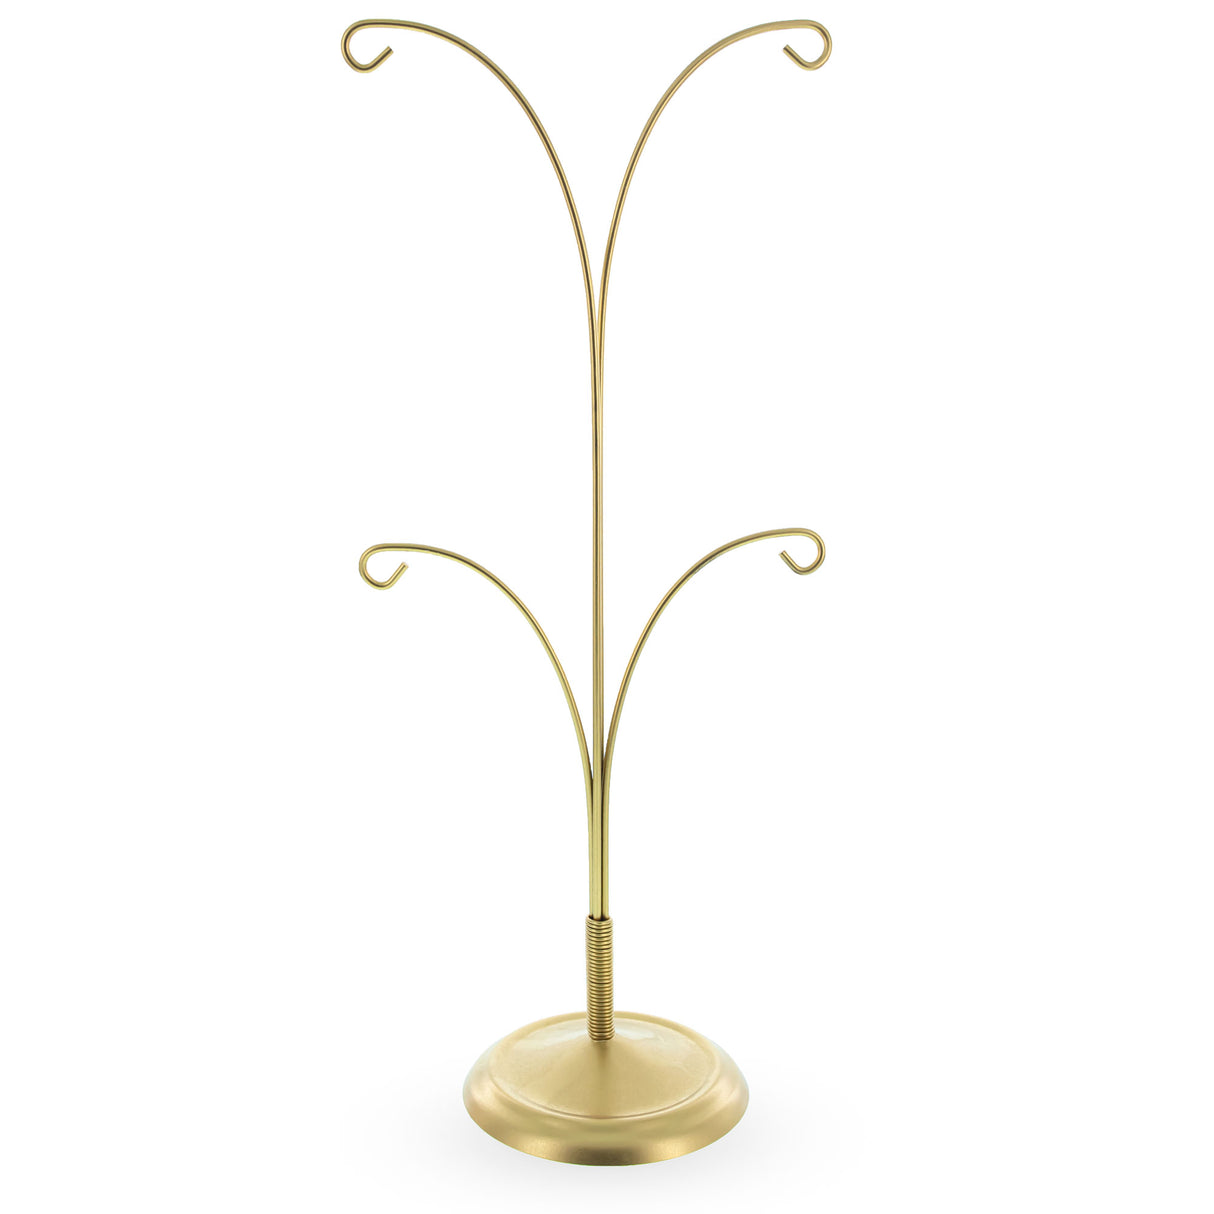 Metal Four Ornaments Tree Gold Metal Solid Round Base Ornament Display Stand 12 Inches in Gold color